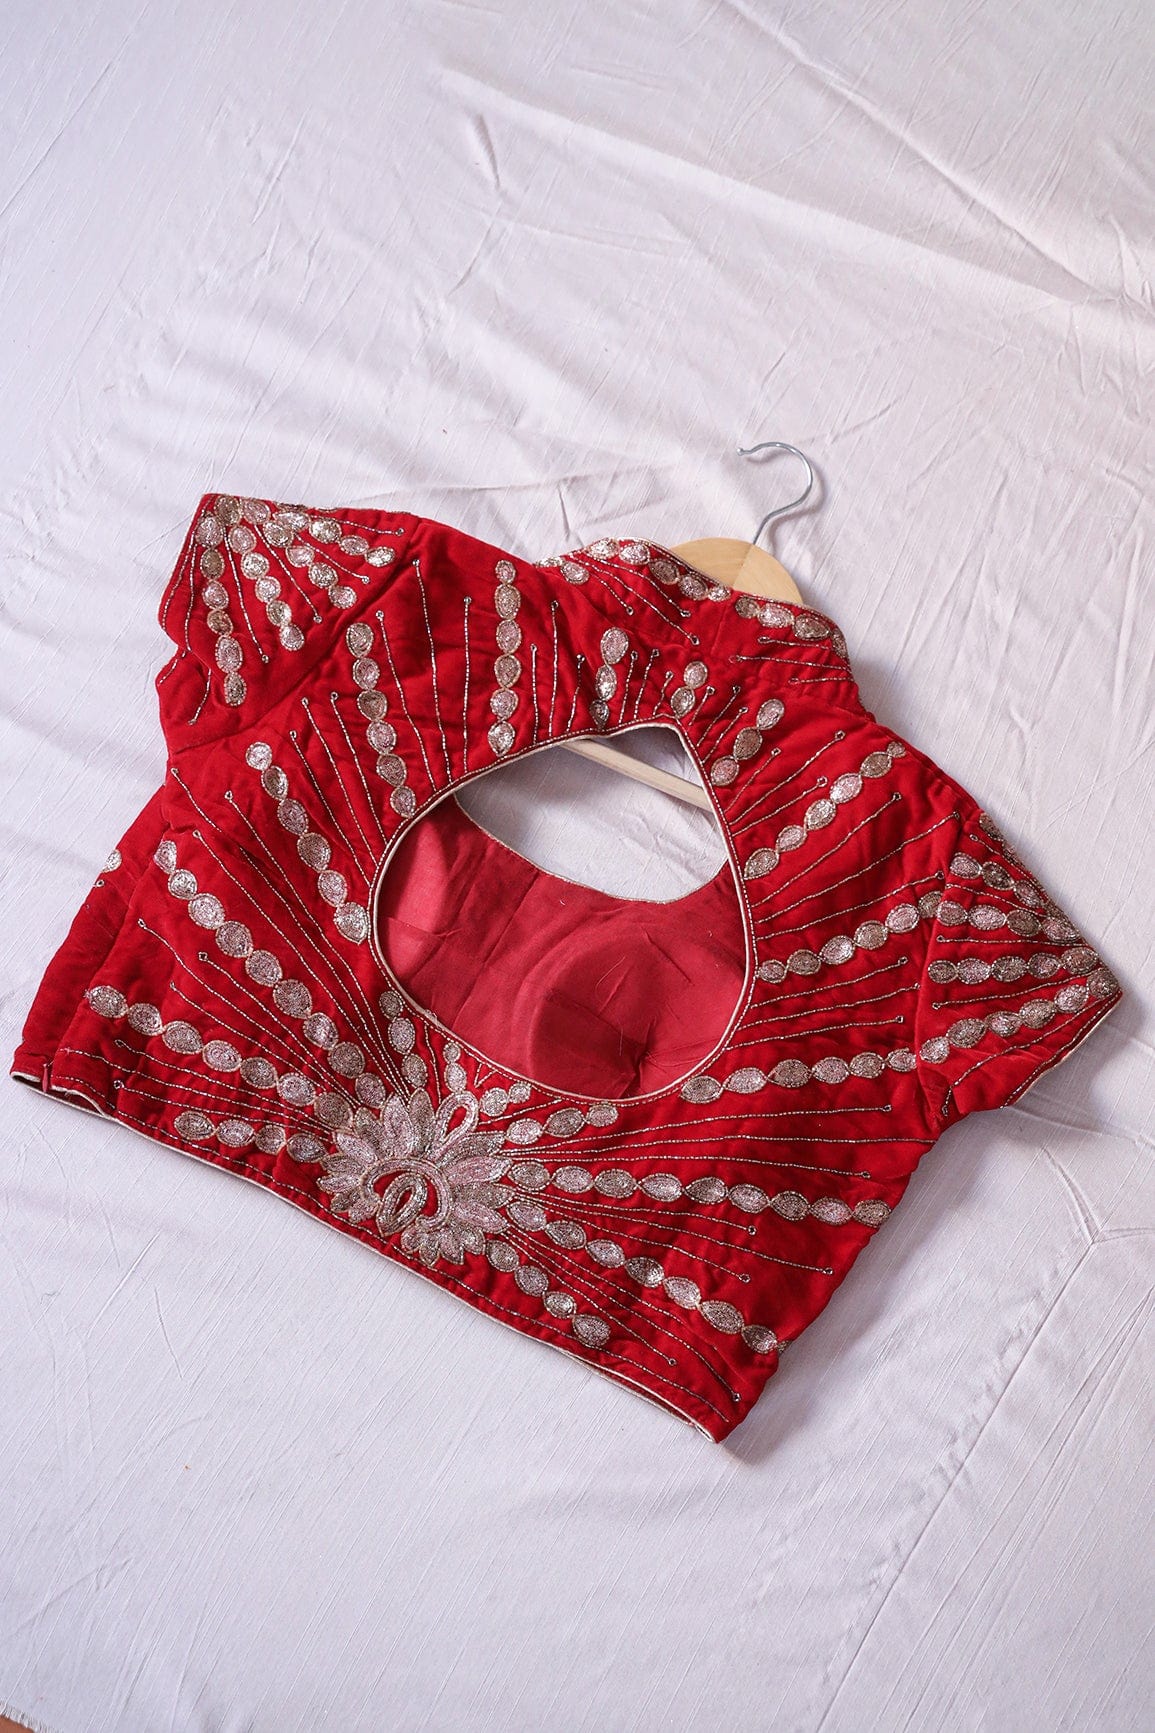 doeraa Blouse Red Hand Work Embroidery Velvet Stitched Blouse